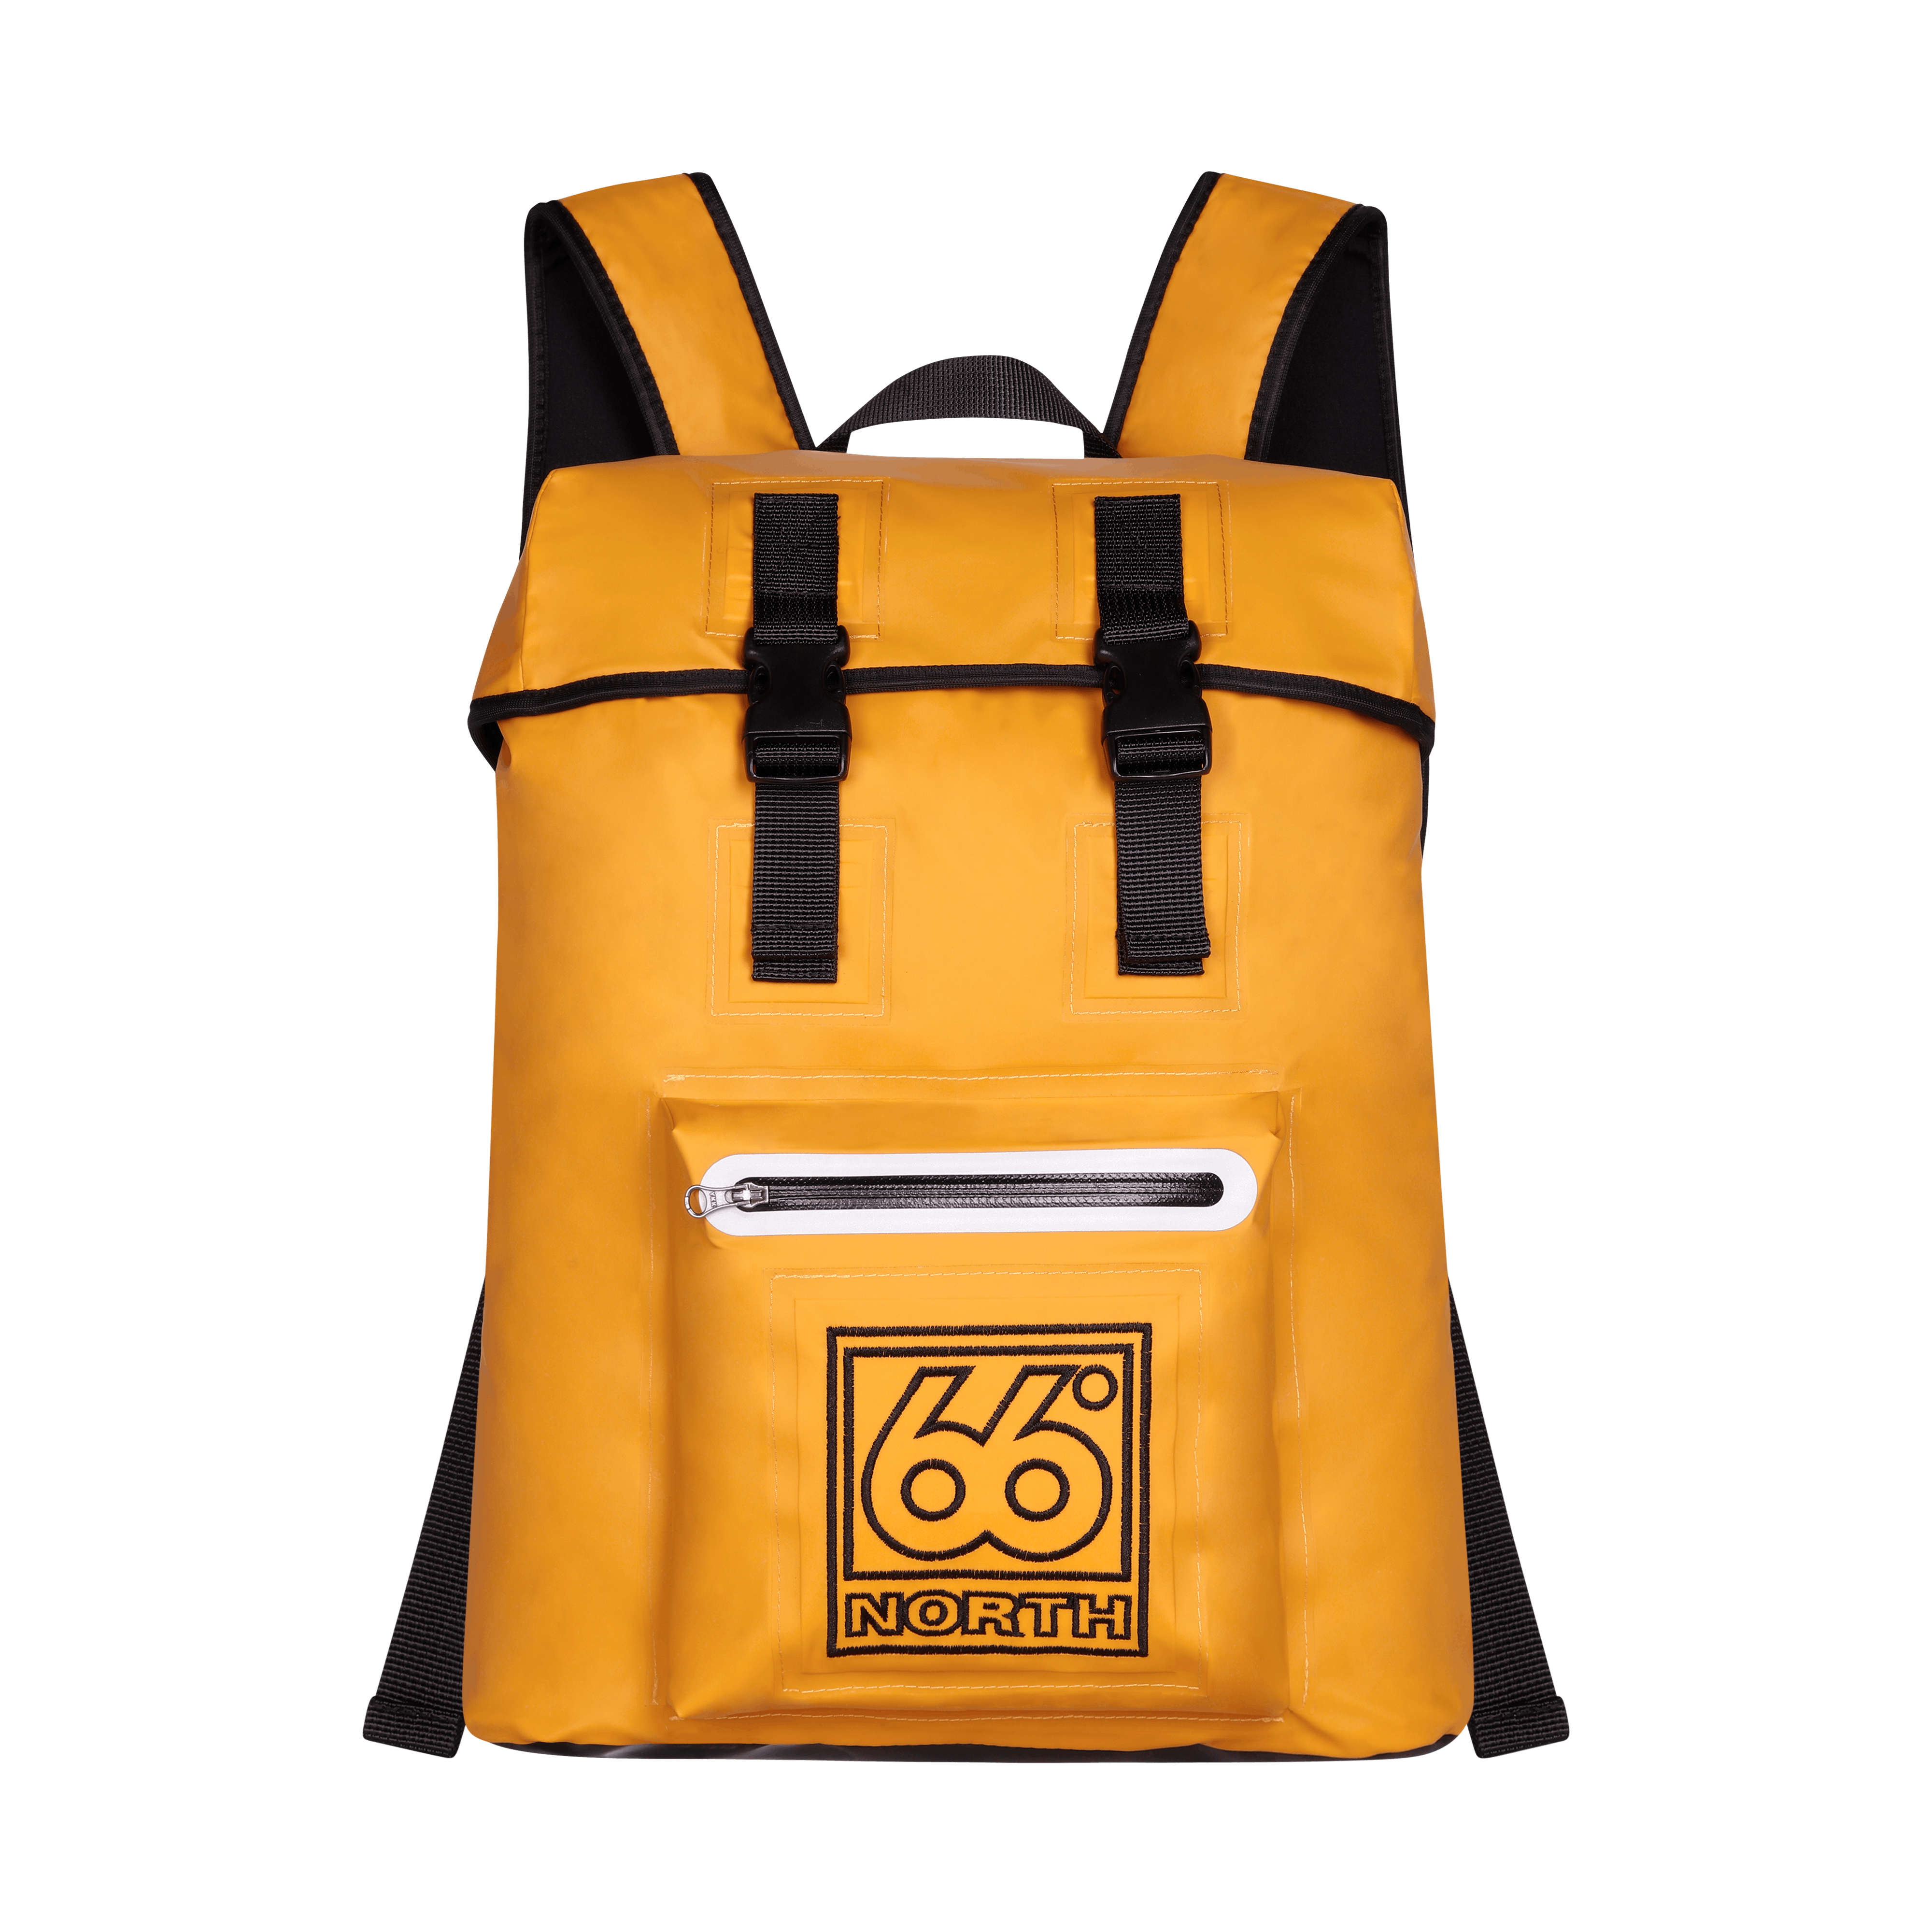 66 North Womens Backpack Accessories - Retro Yellow - One Size